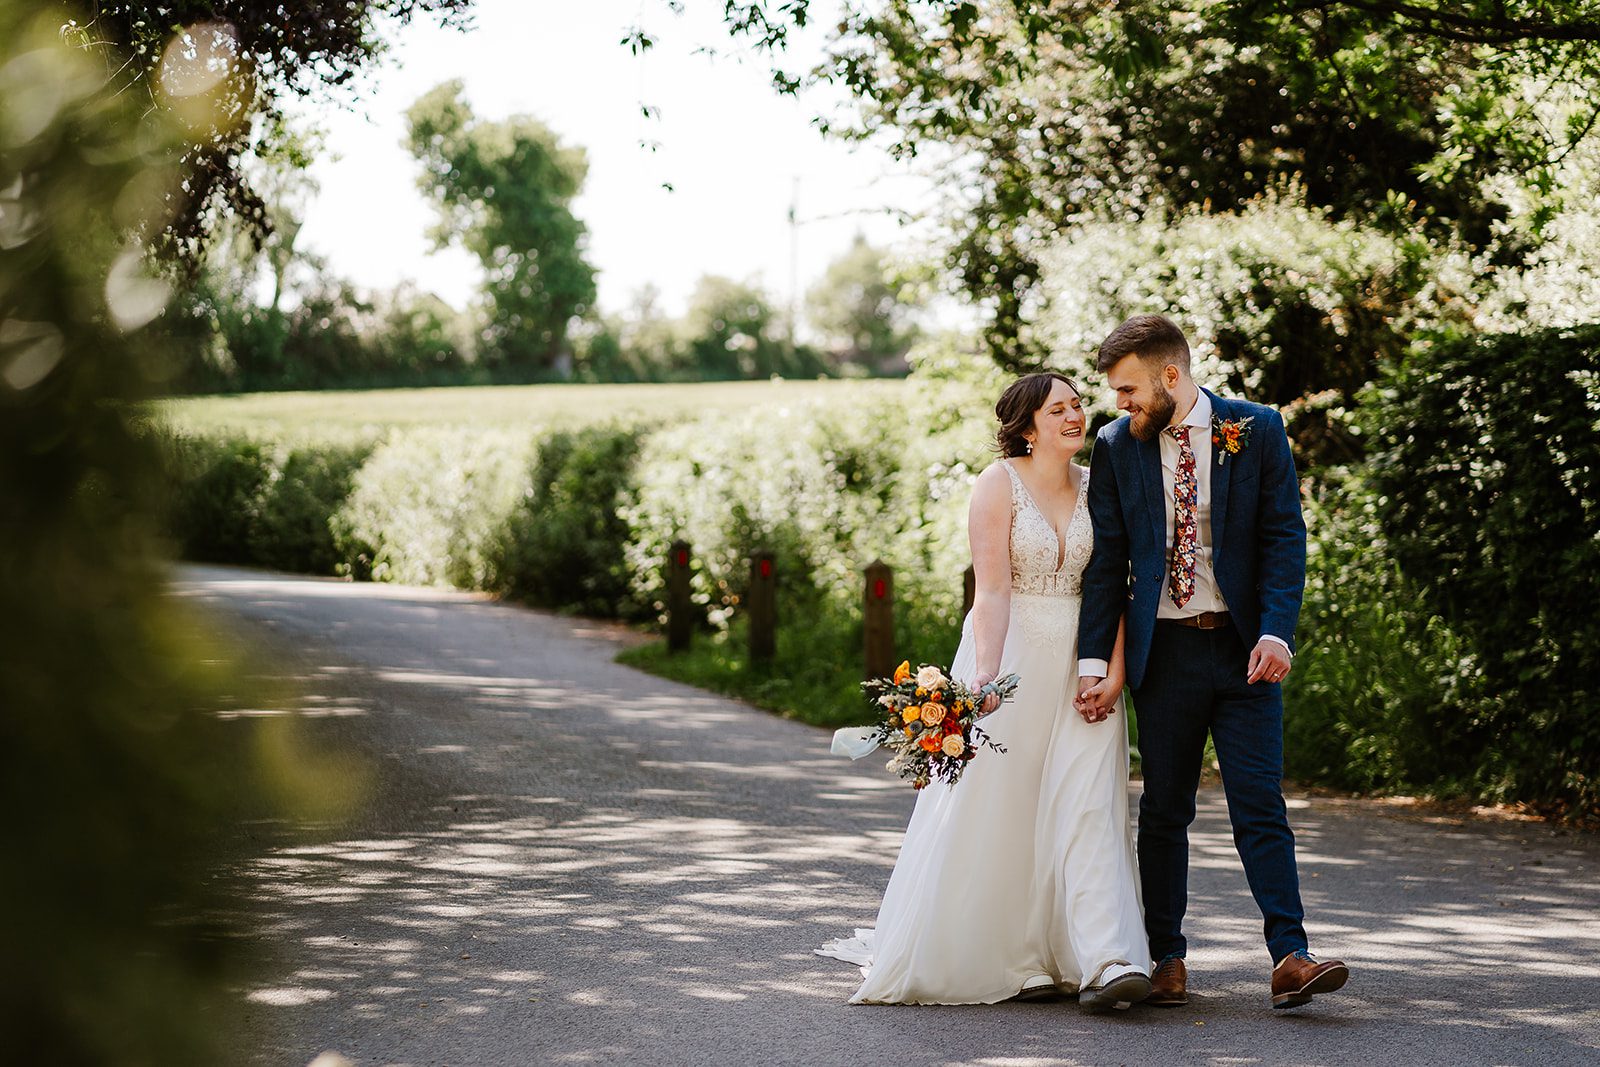 Bride and groom walk along country lane on a sunny wedding day at Larkspur Lodge Wedding vennue in Cheshire